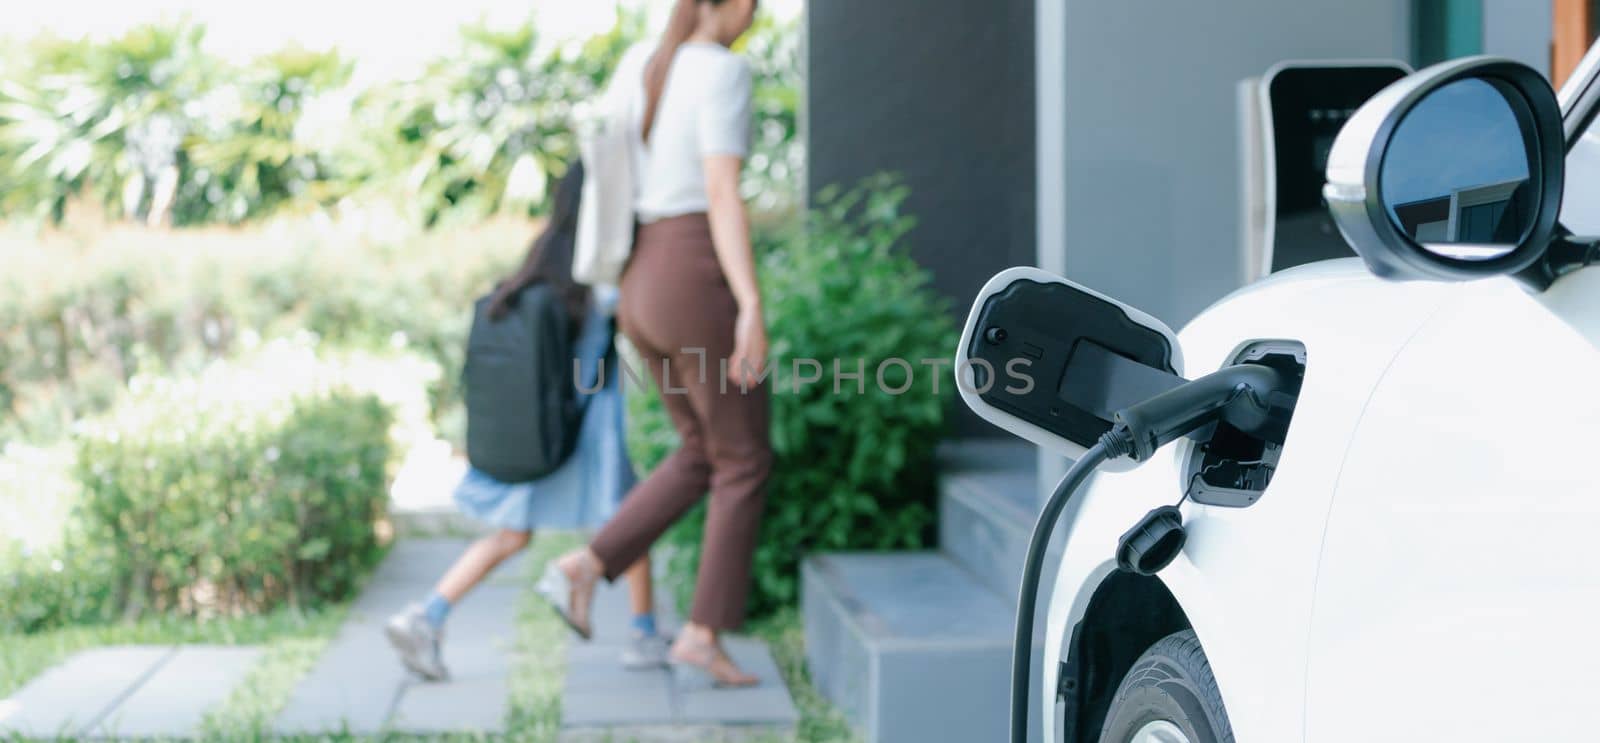 Focus EV car charging at home charging point with blurred background of family. by biancoblue